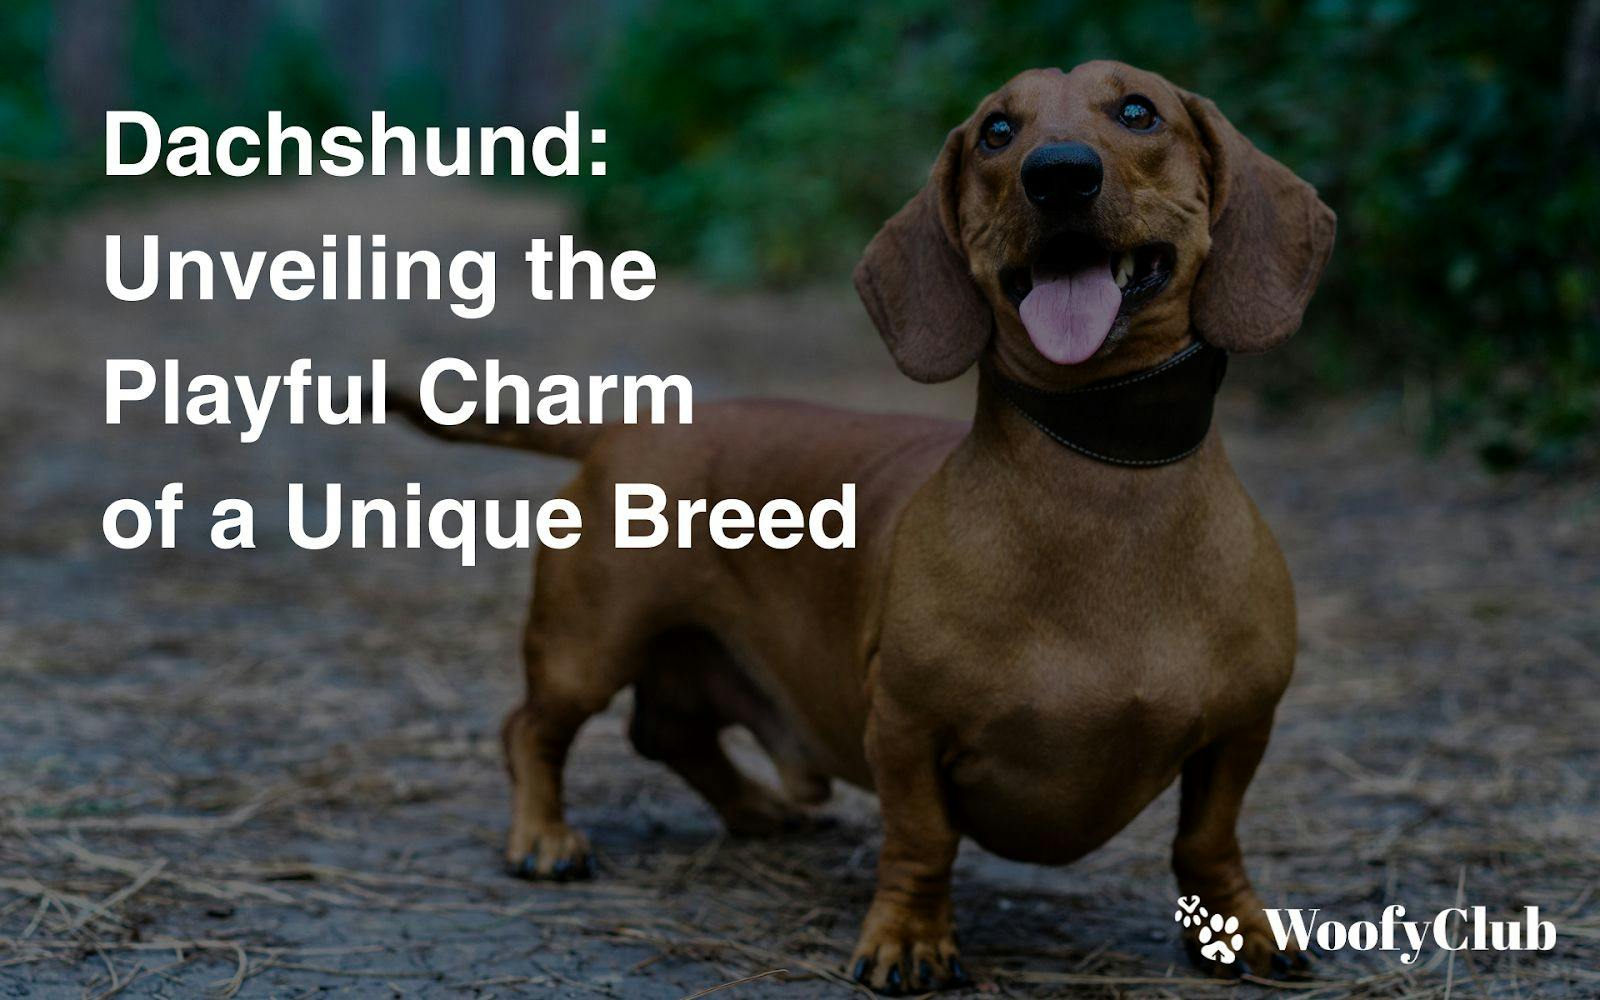 Dachshund: Unveiling The Playful Charm Of A Unique Breed